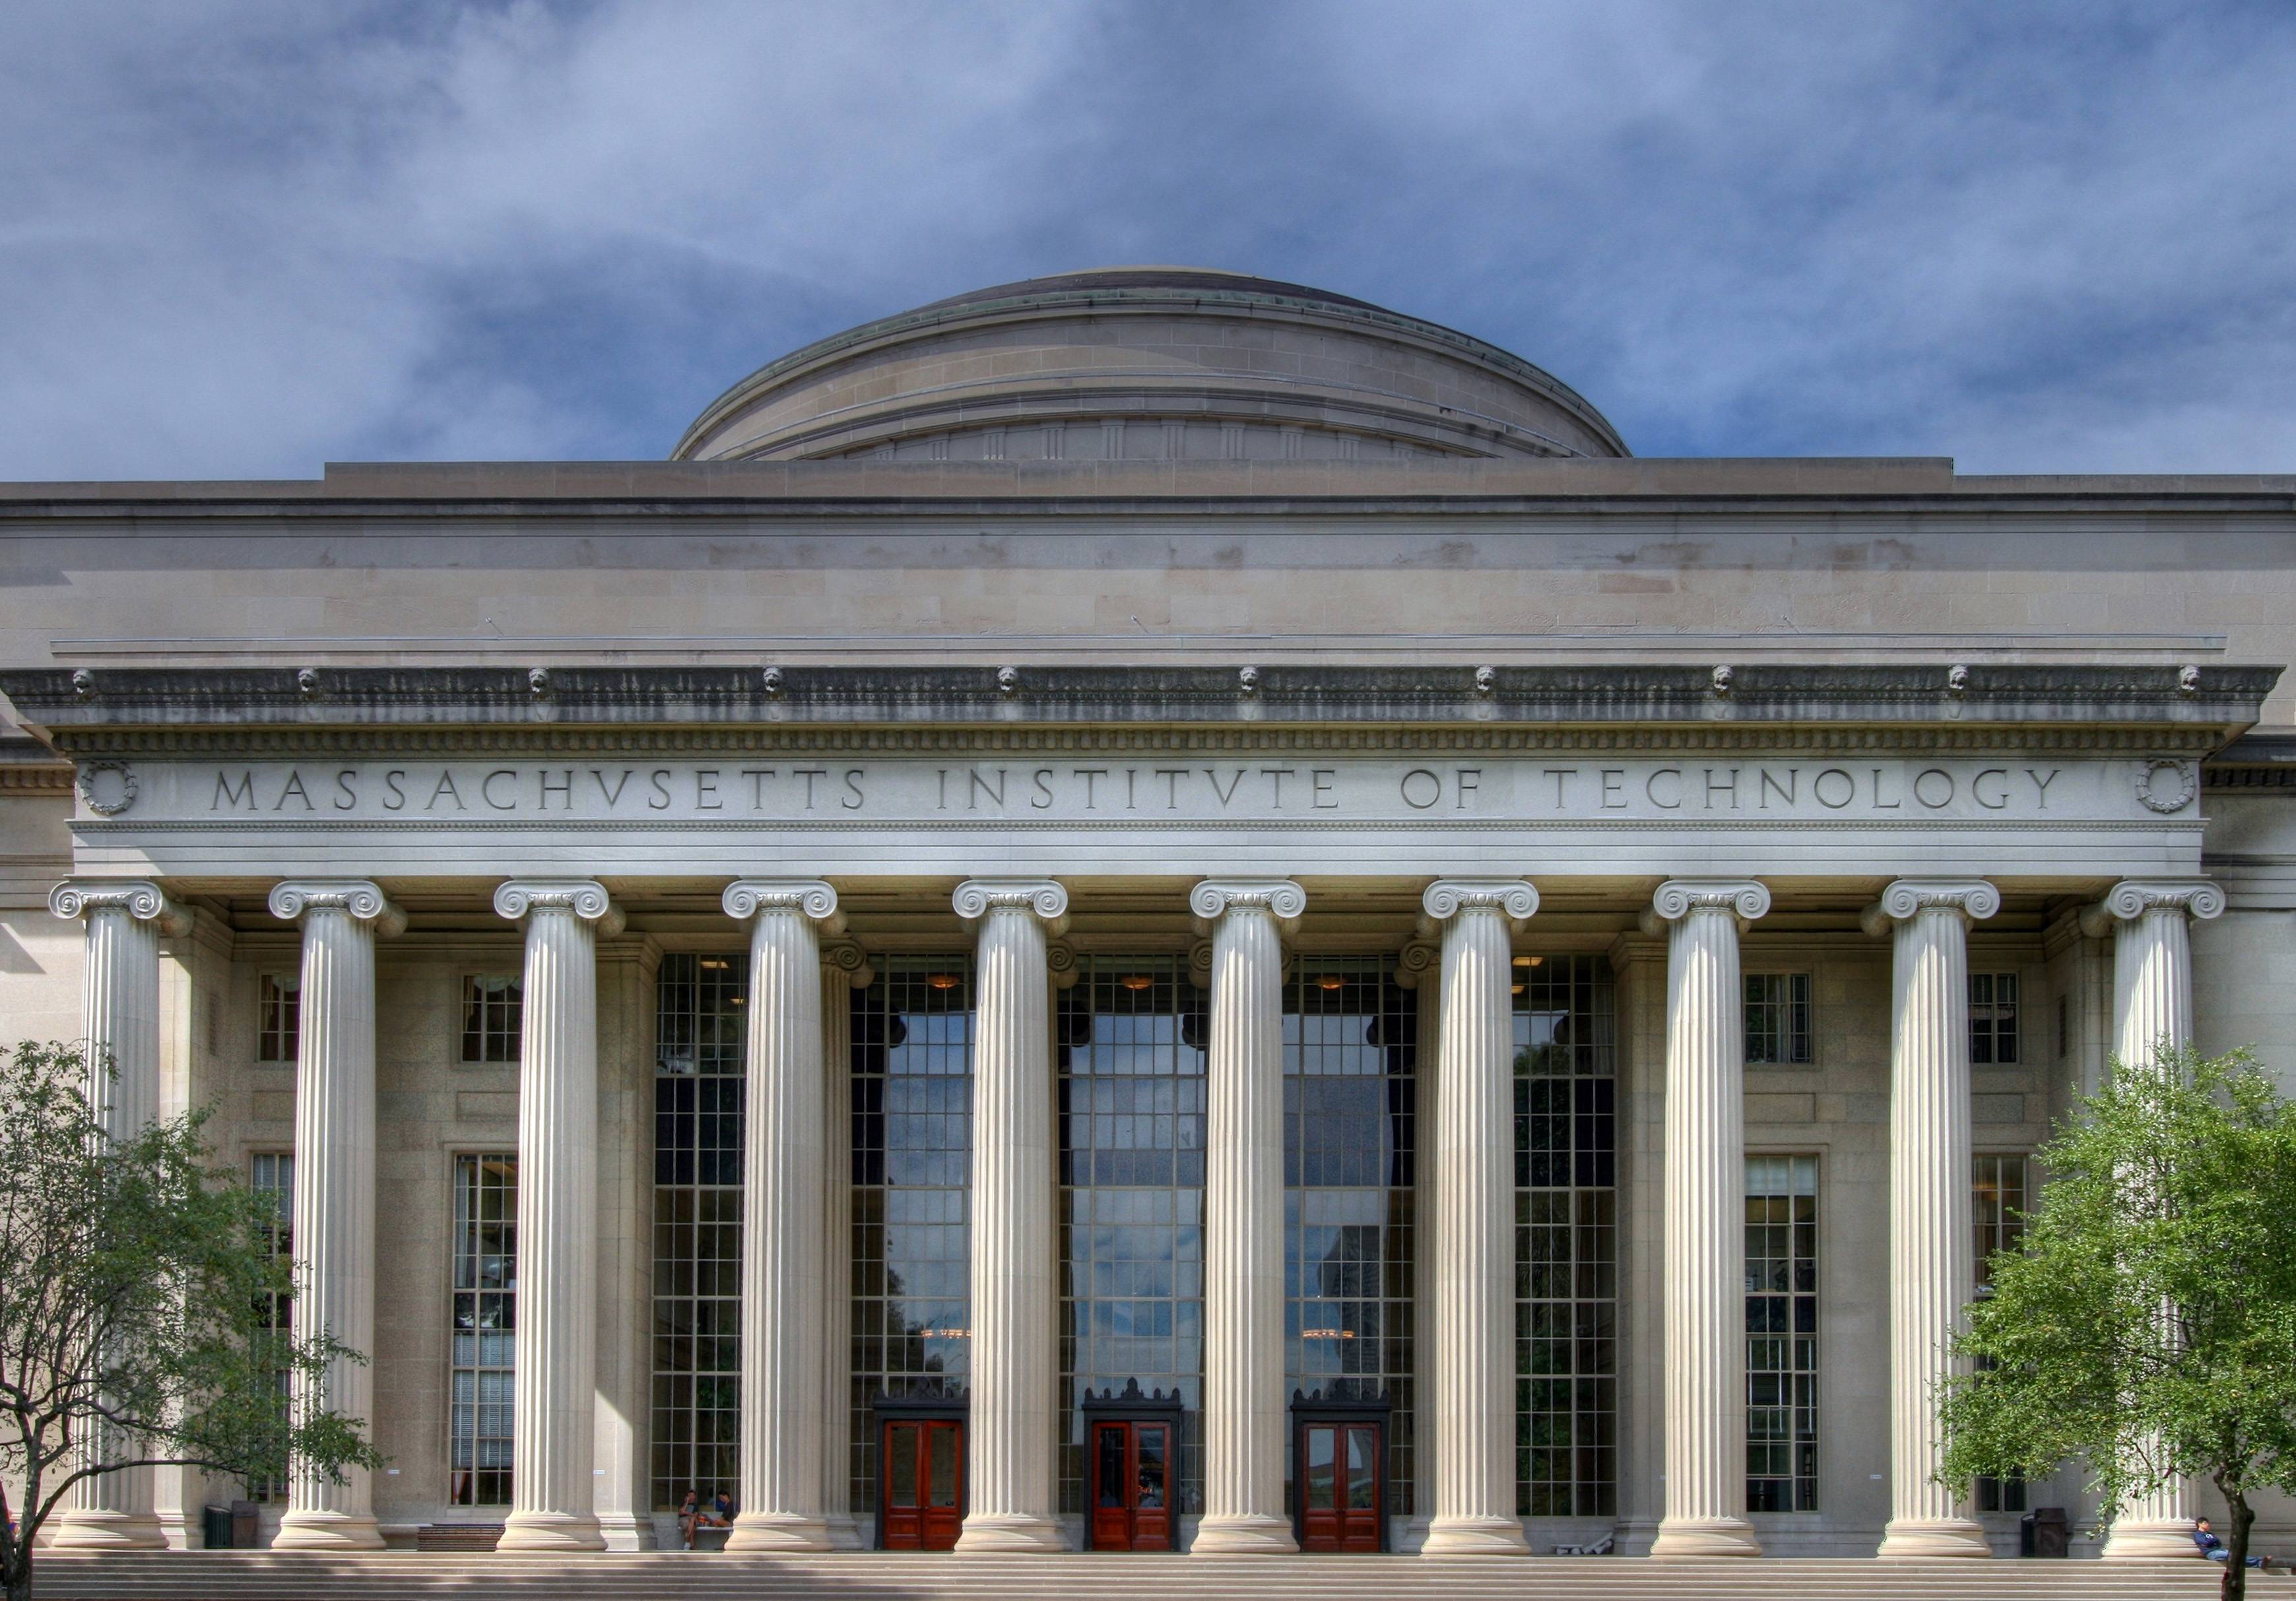 MIT Building, the free encyclopedia